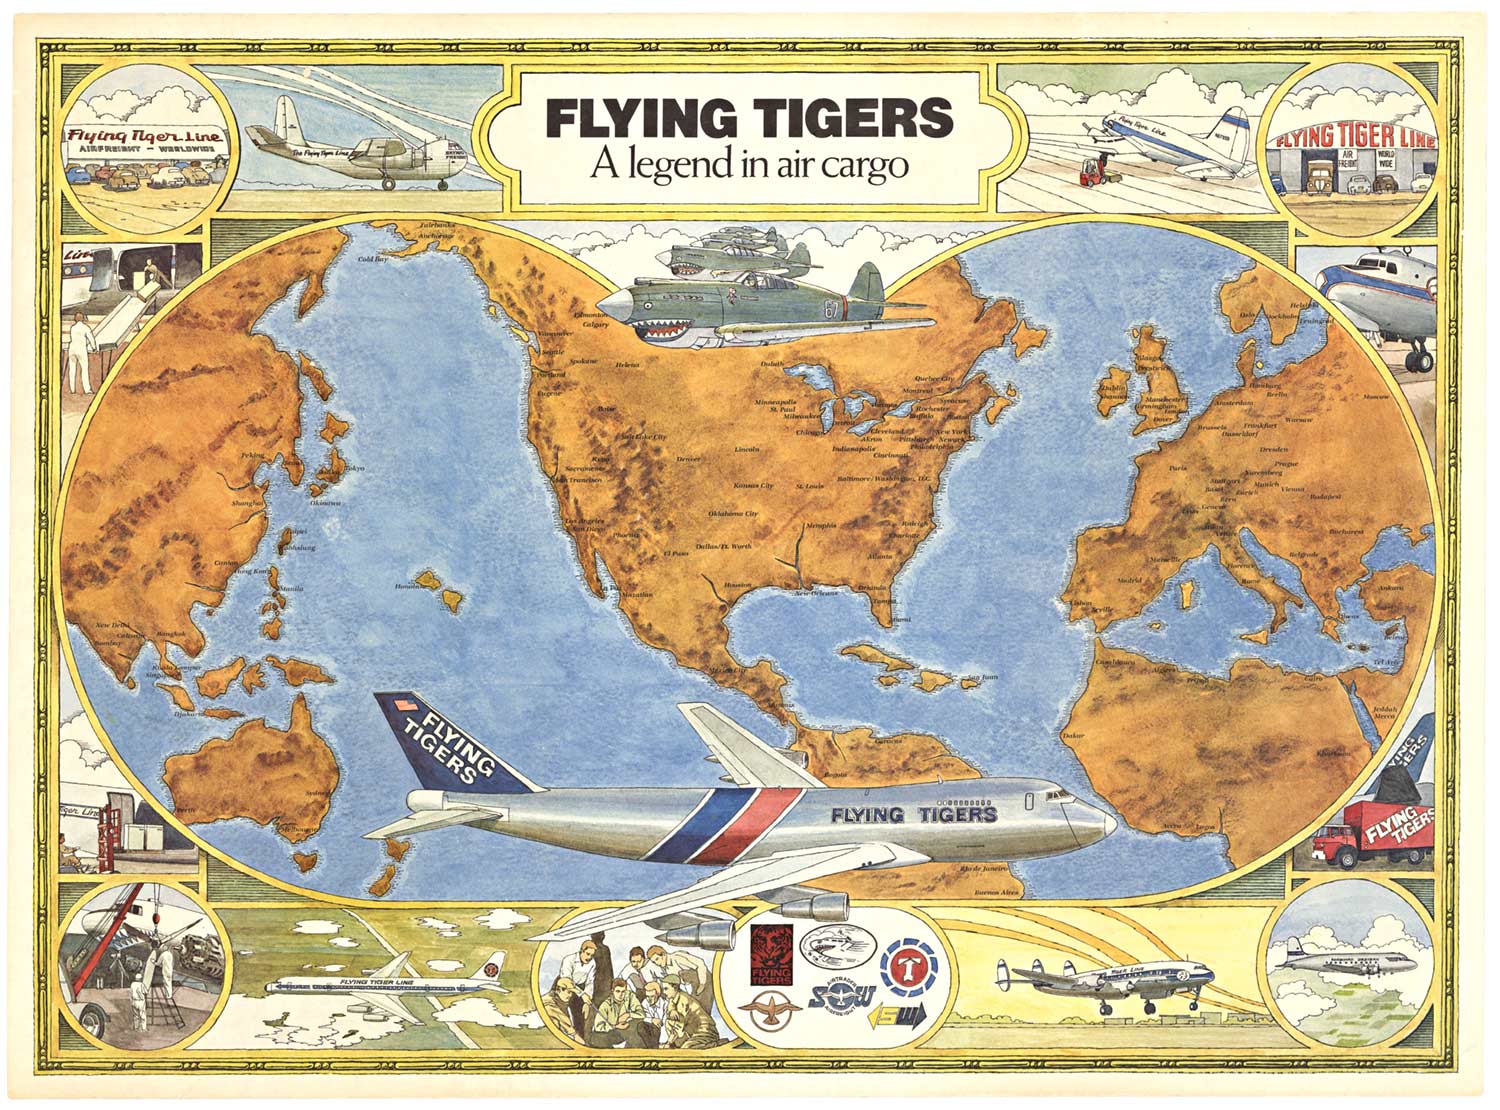 Original linen backed FLYING TIGERS - A legend in air cargo, aviation poster for sale. This poster is part of The Smithsonian National Air and Space Museum. Fly Now: The National Air and Space Museum Poster Collection.